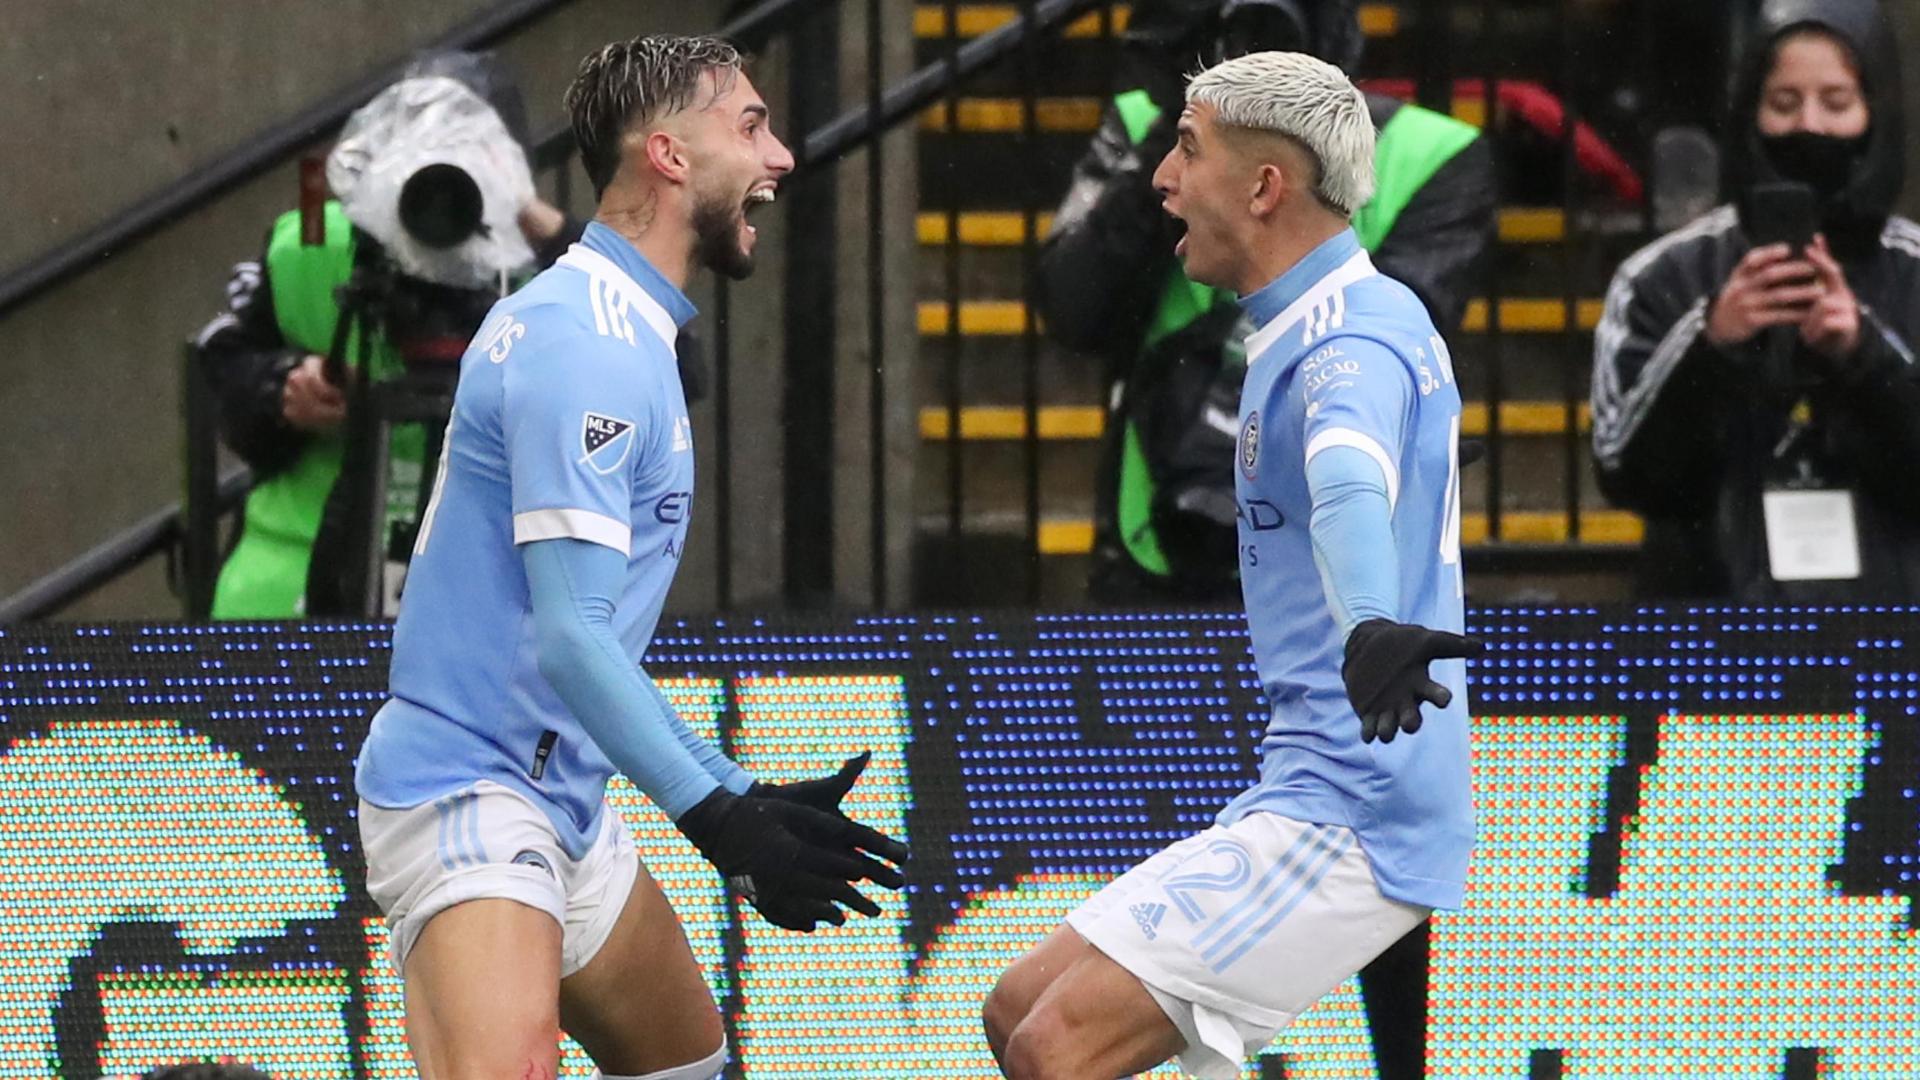 NYCFC beats Portland Timbers on penalties to win first title